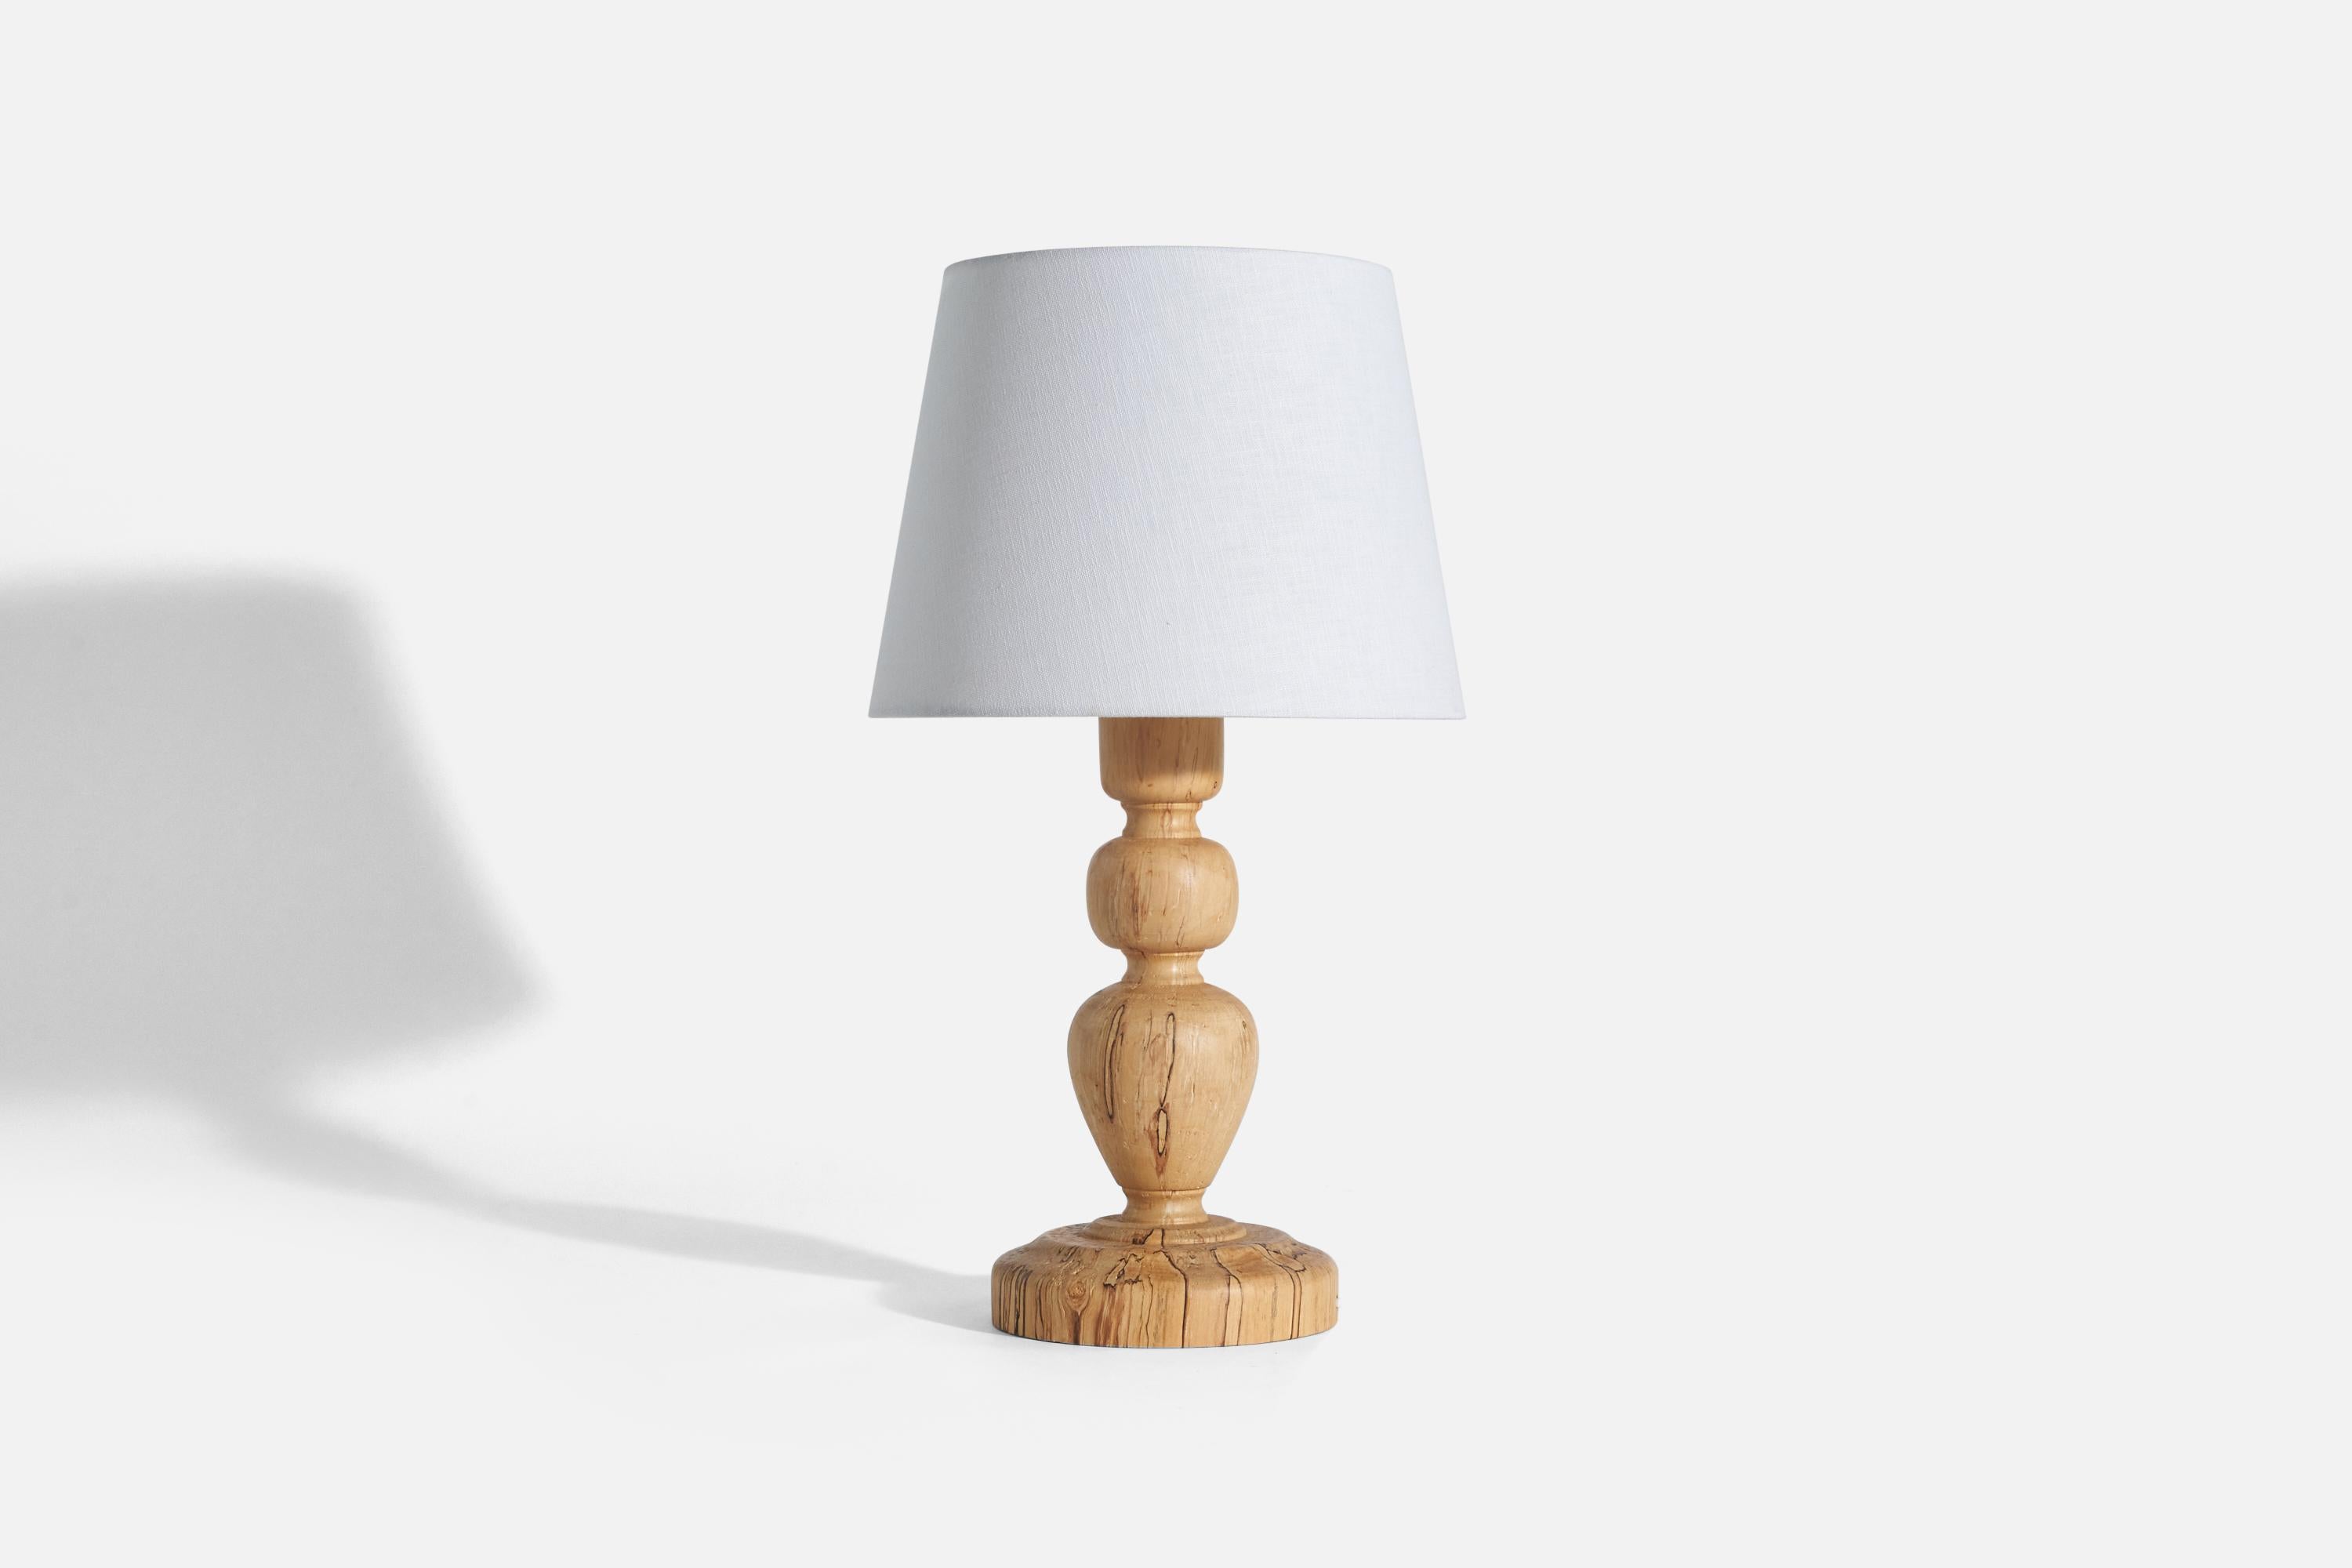 A masur birch table lamp designed and produced in Sweden, 1970s.

Sold without Lampshade(s)
Dimensions of lamp (inches) : 15 x 7 x 7 (height x width x depth)
Dimensions of shade (inches) : 9 x 12 x 9 (top diameter x bottom diameter x